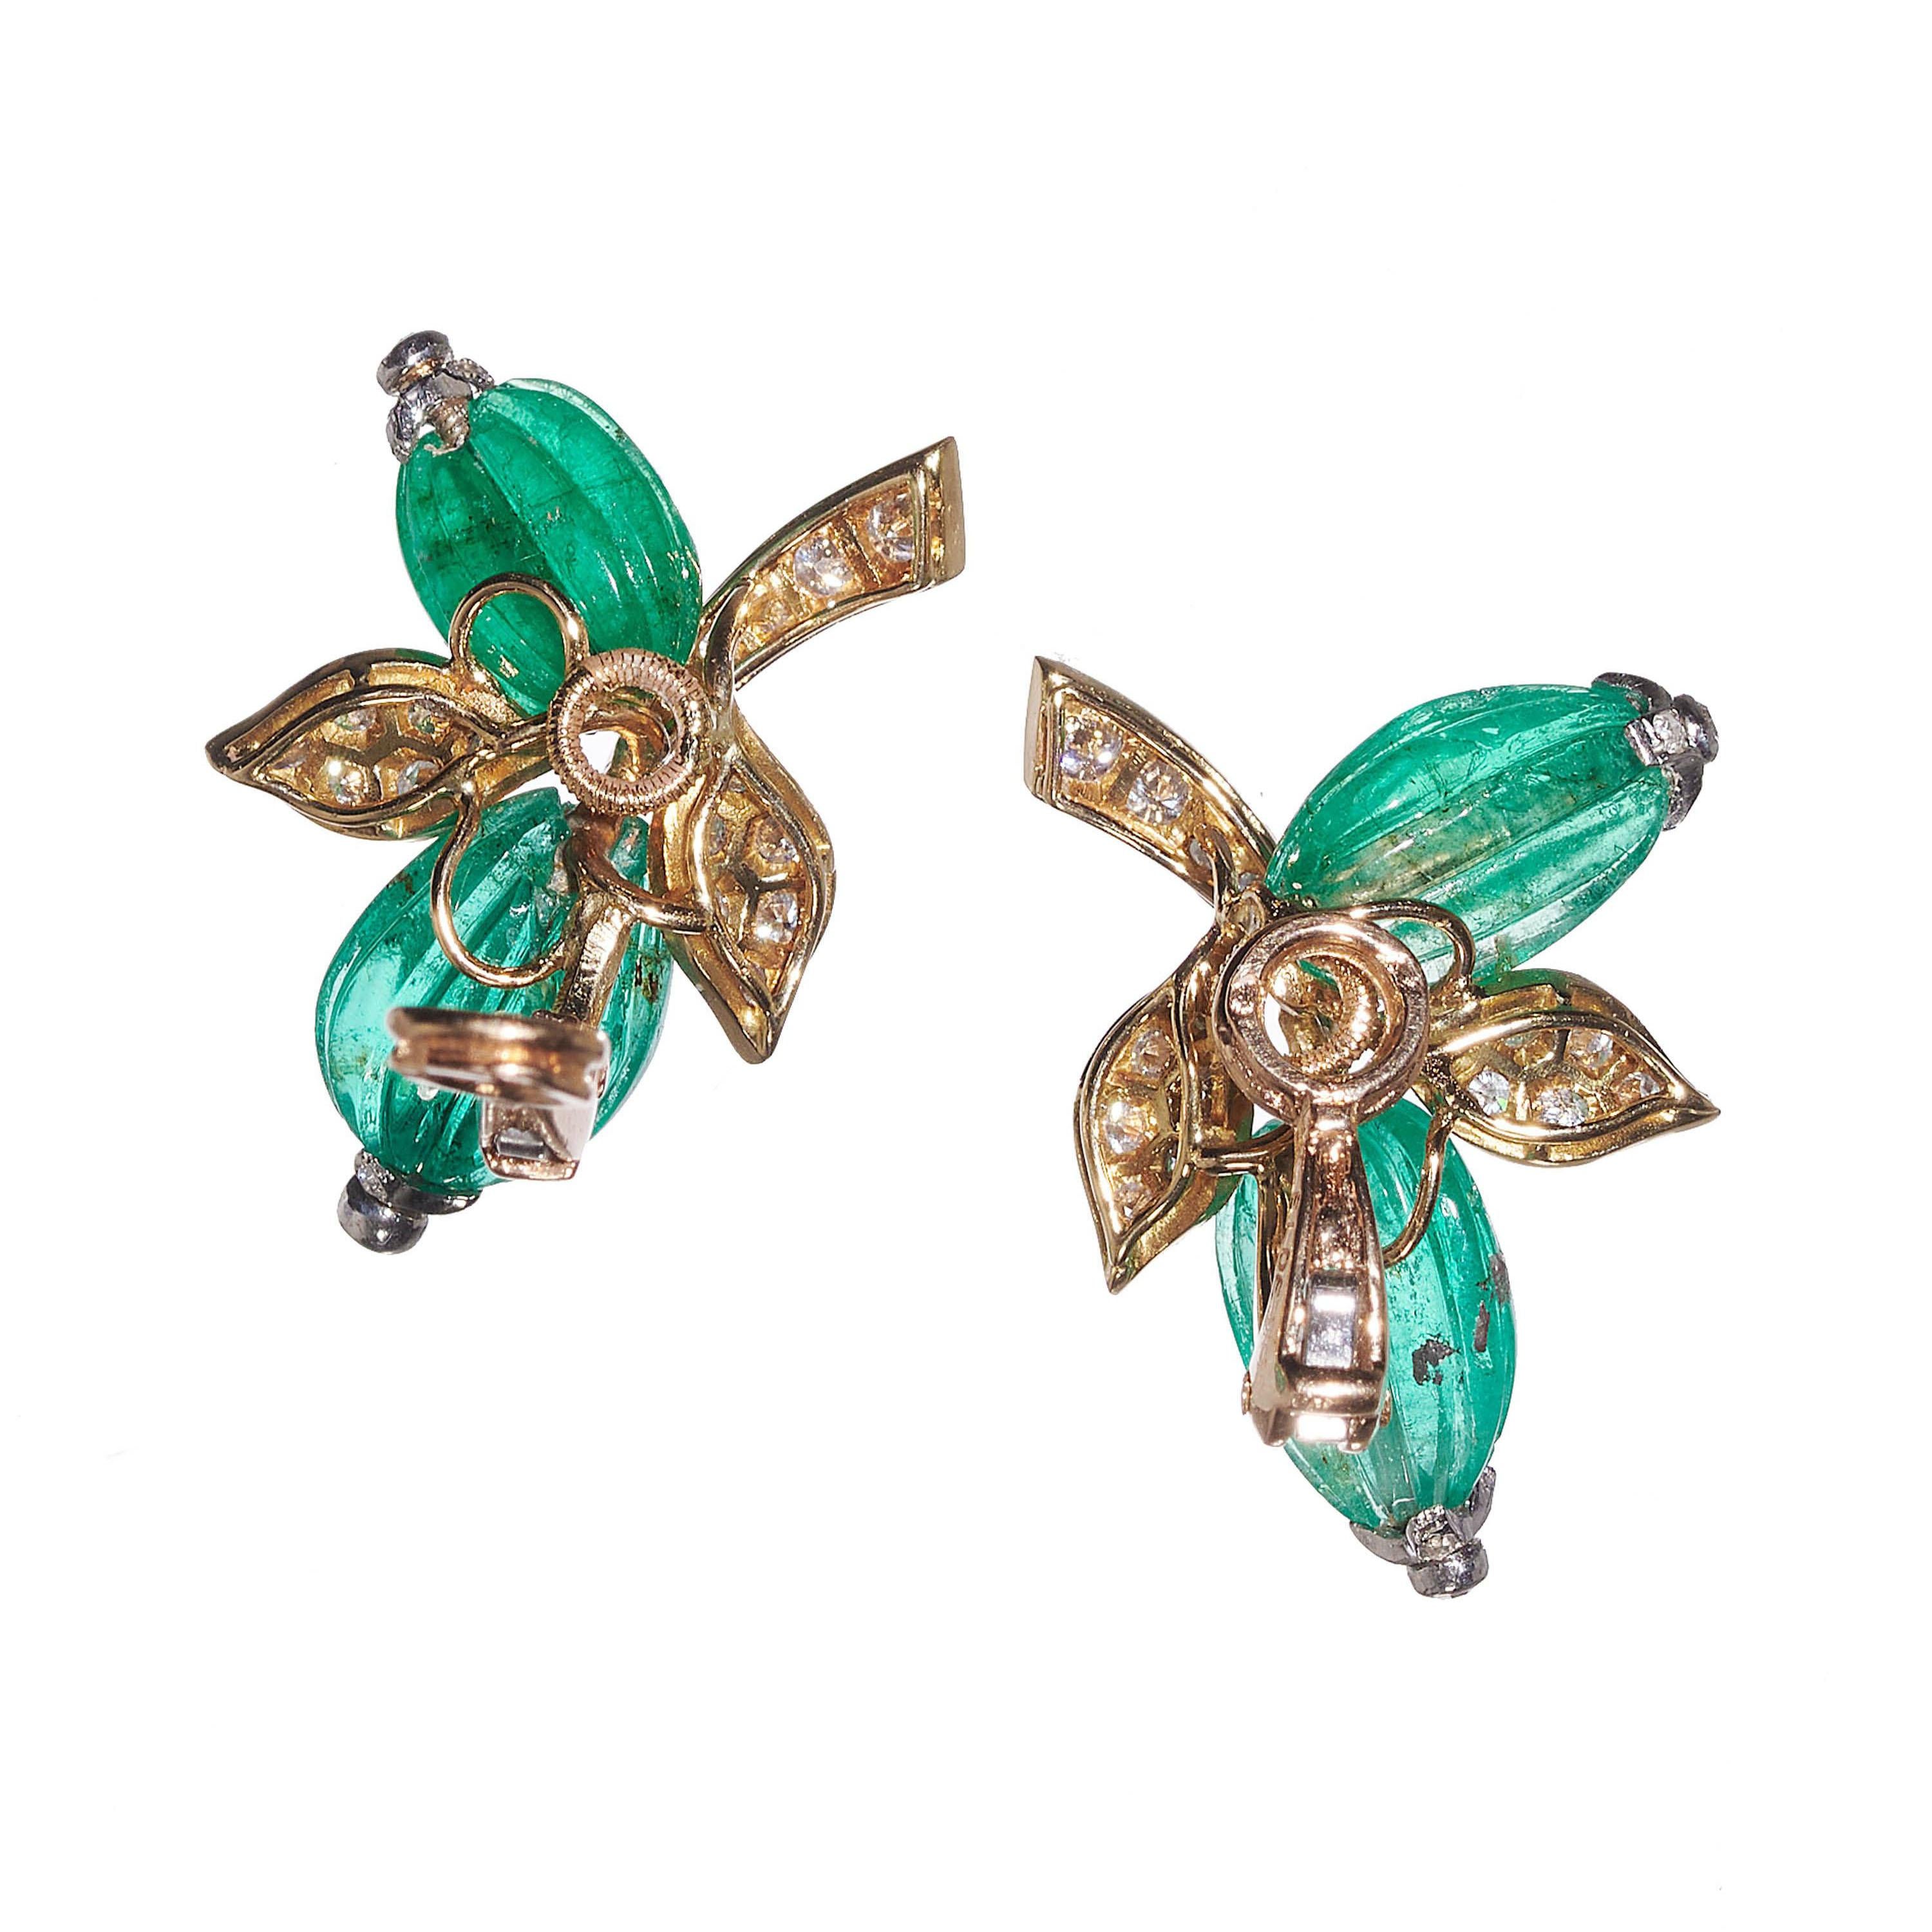 Vintage French Emerald Diamond and Gold Clip-on Earrings by André Vassort, Circa In Good Condition For Sale In London, GB